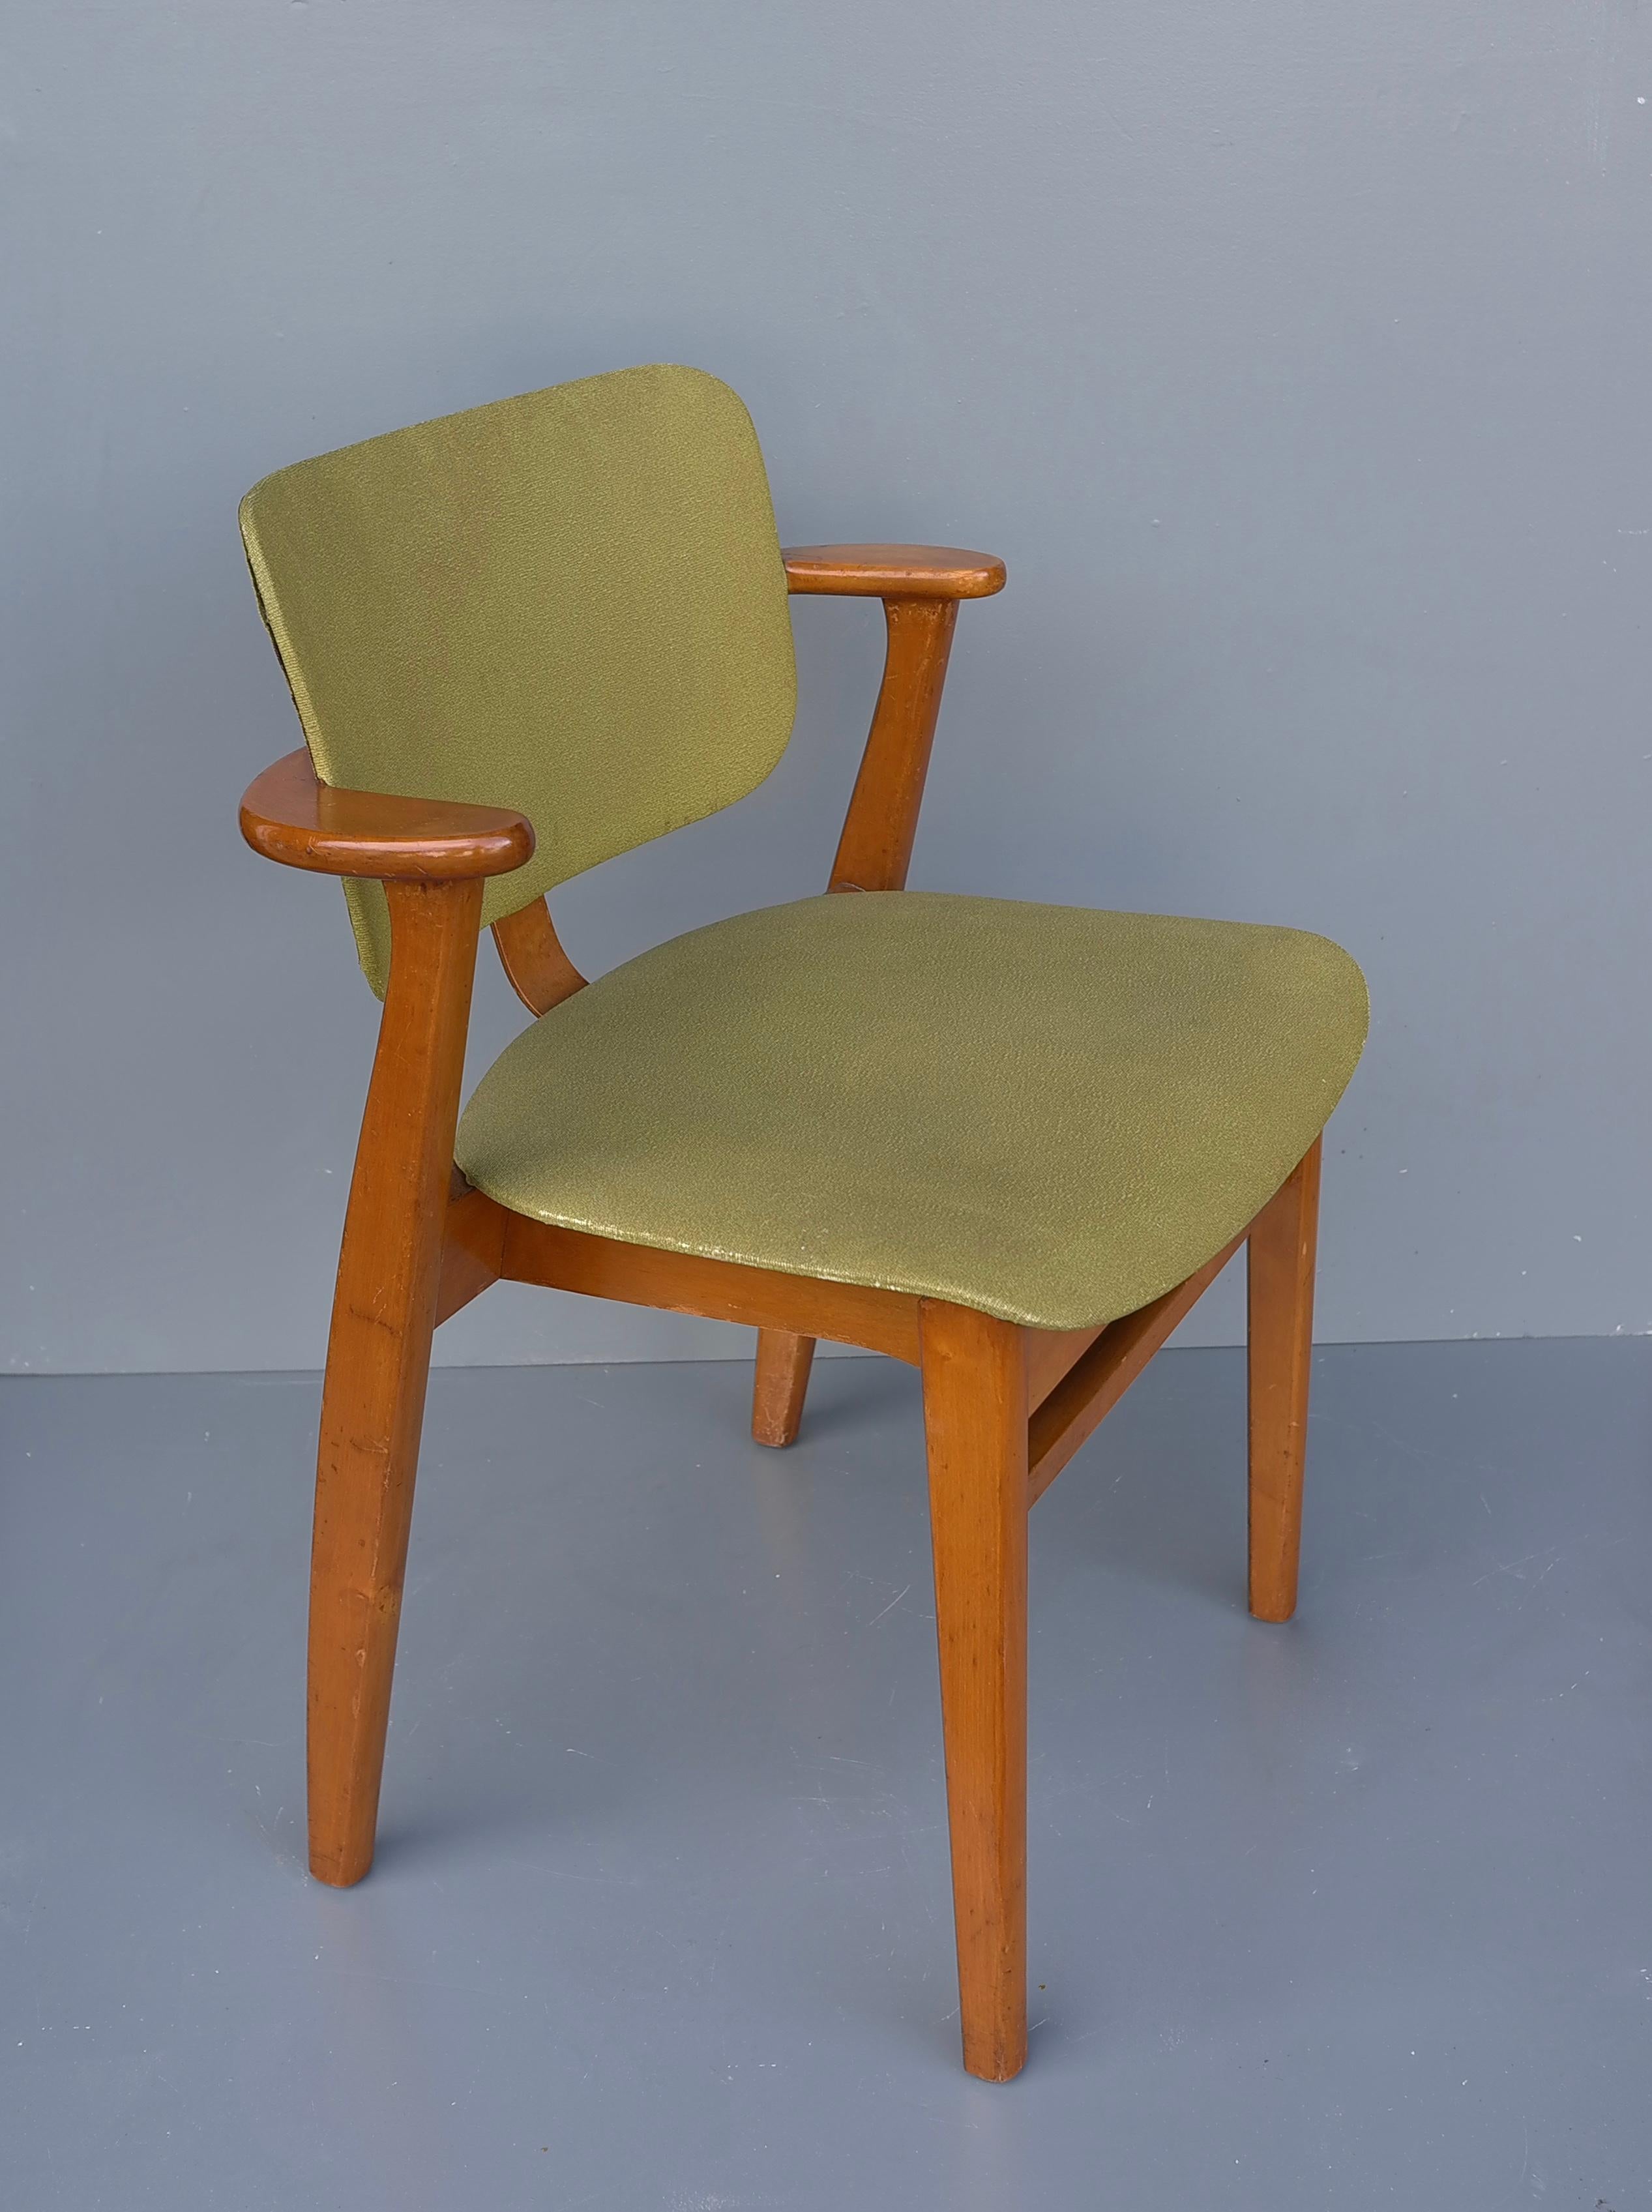 Ilmari Tapiovaara Domus Armchair, Finland 1950's

Early edition with it's original green faux leather upholstery.